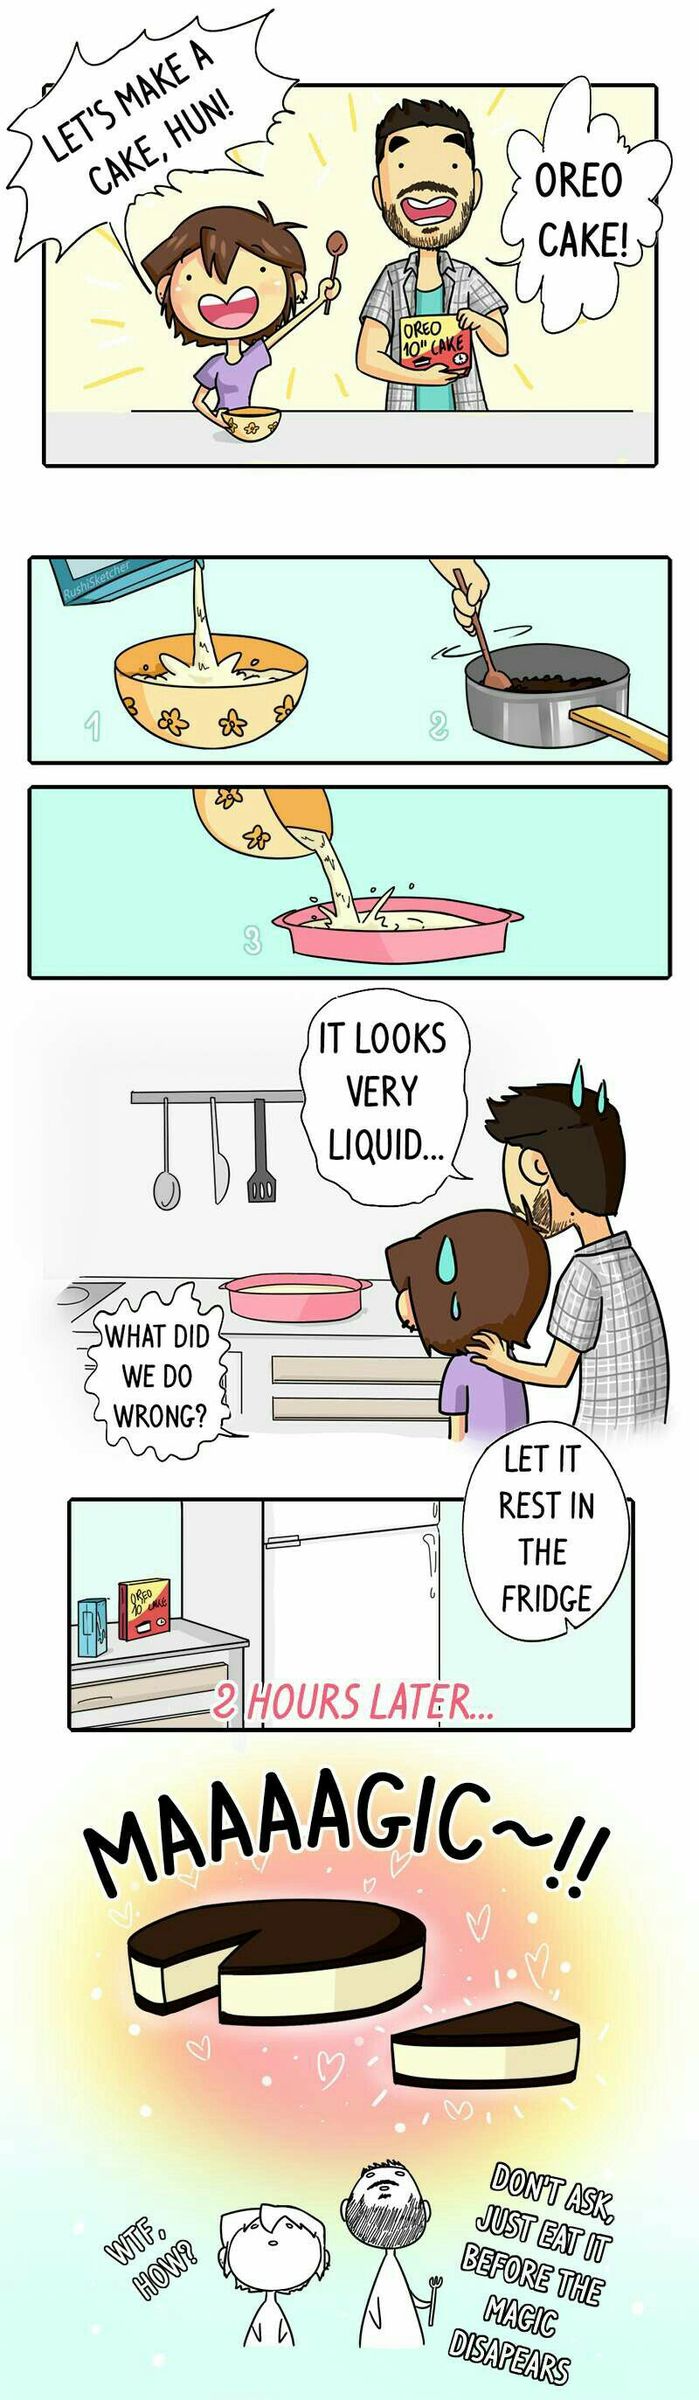 cakes are mysterious - meme